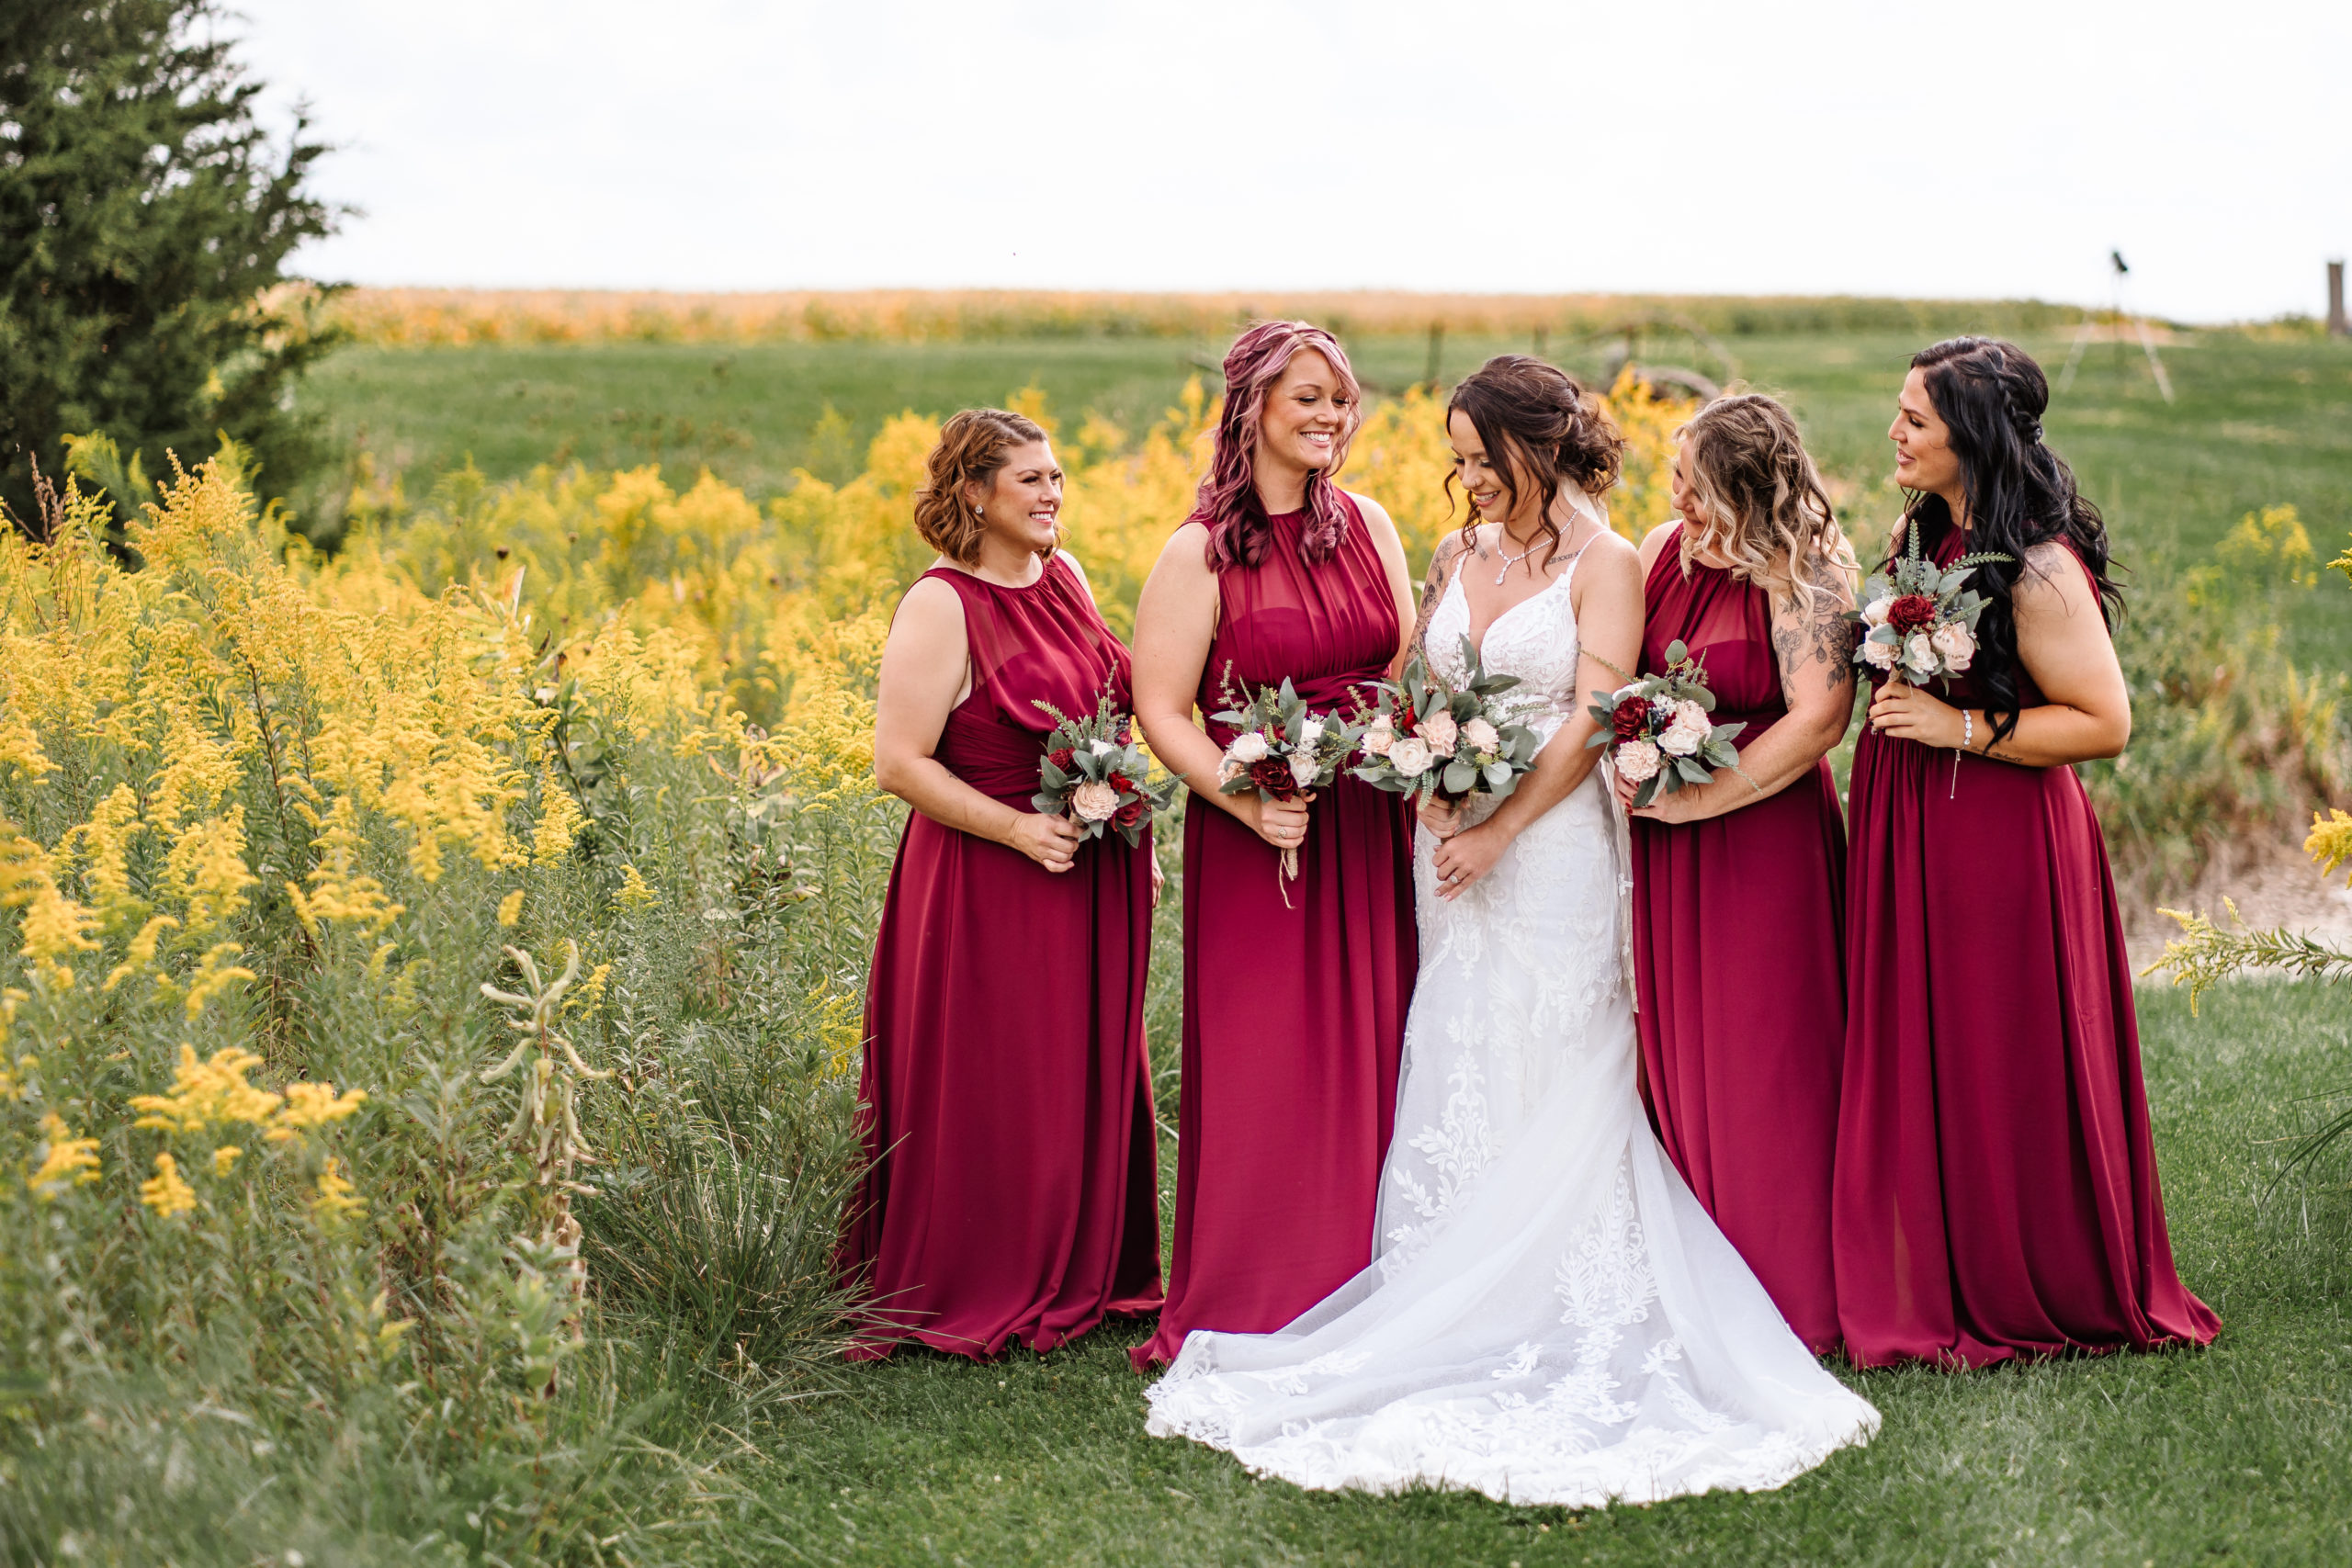 bride and bridesmaids standing together in a field of ragweed
